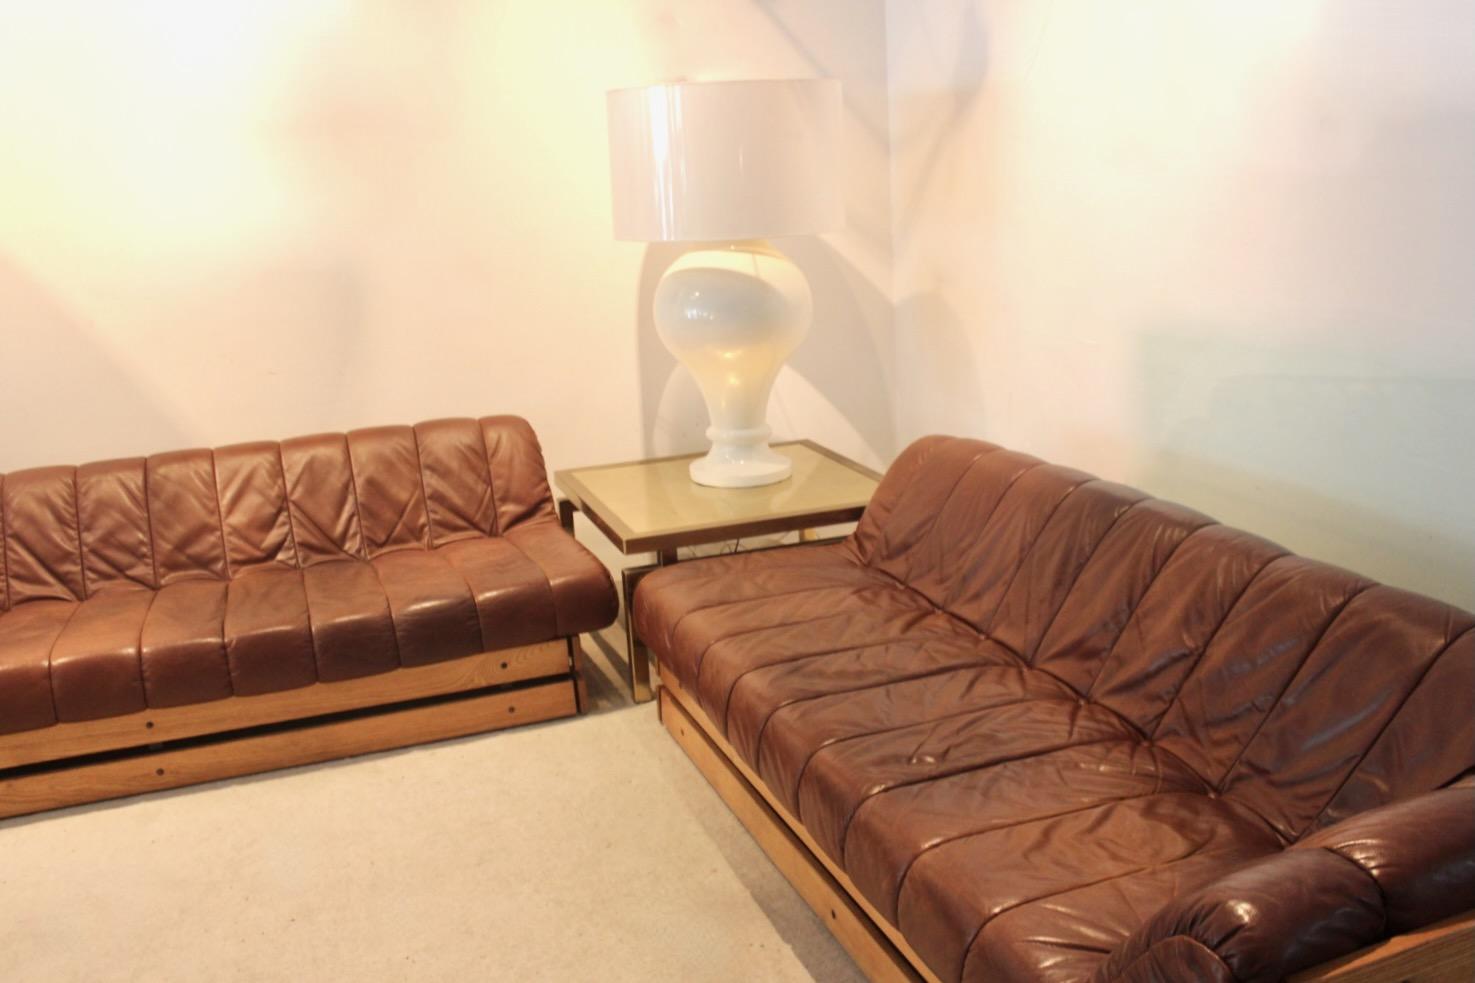 Exceptional Cognac Leather sofa set made in the 1970’s in the Netherlands. Wear consistant with age and use and in general the patin is very beautiful and the Sofa is in very good health. This Lounge sofa set from the 70s often has a low-profile